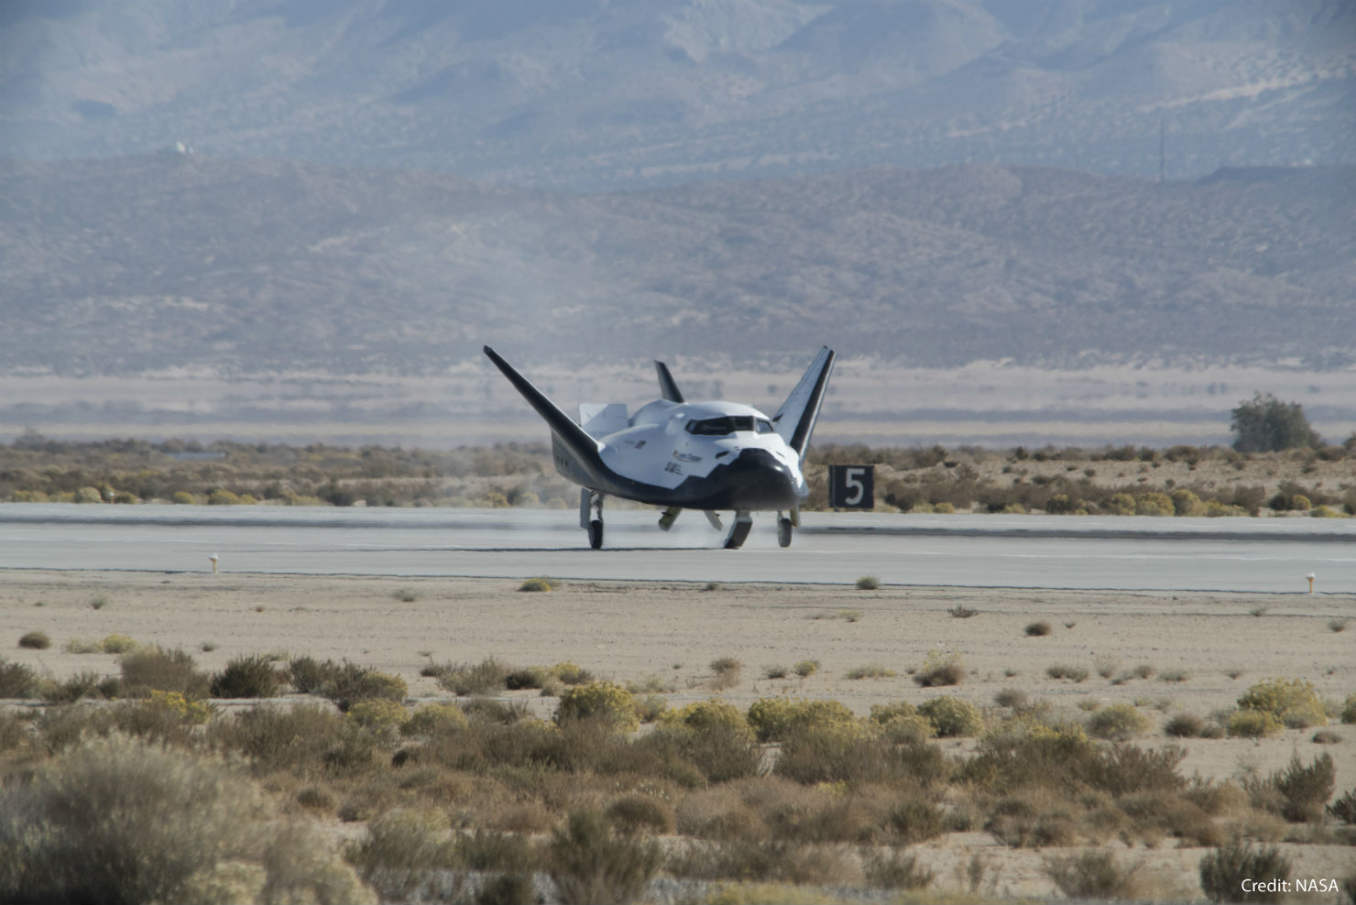 Free flight success for Dream Chaser